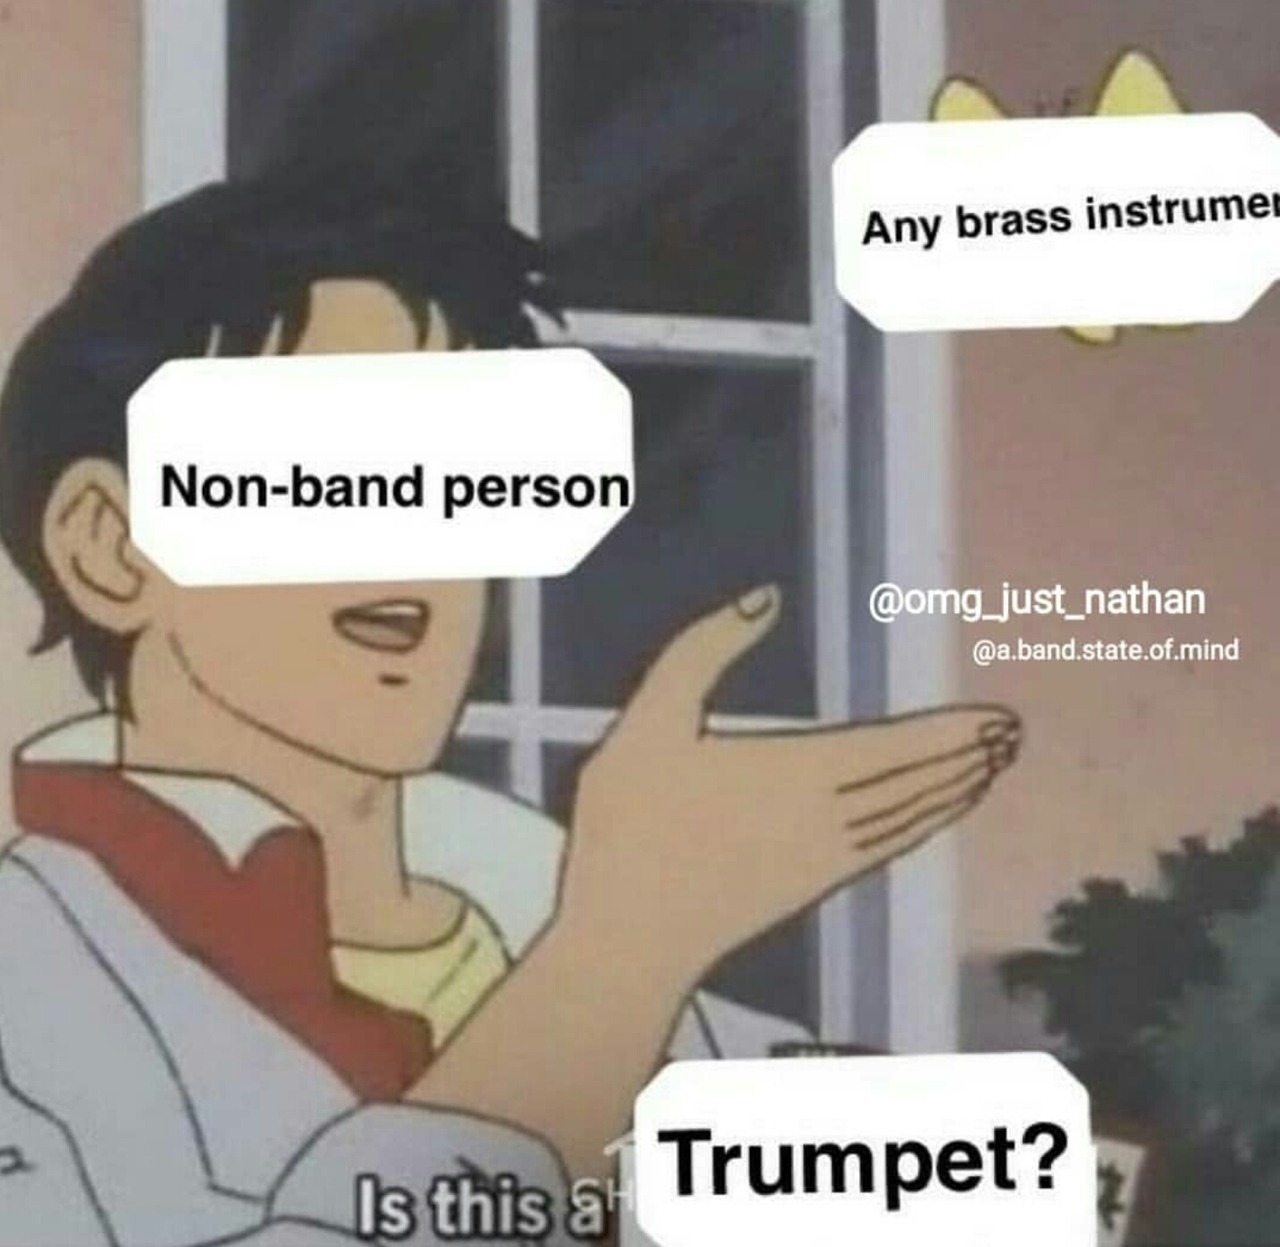 Or a giant trumpet?